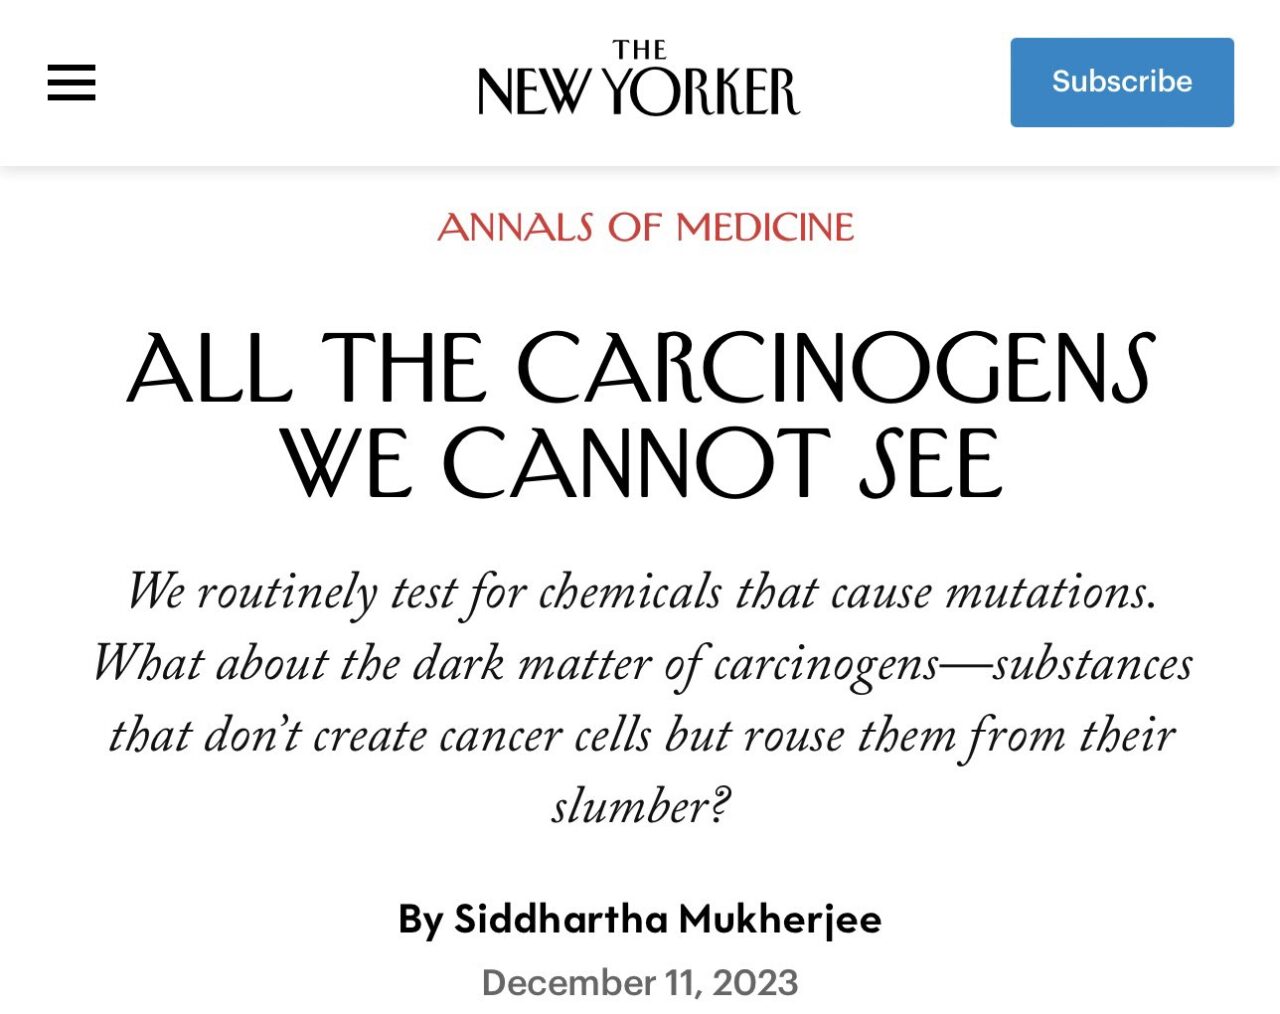 Toni Choueiri: MUST READ piece by Siddhartha Mukherjee on the causes of cancer